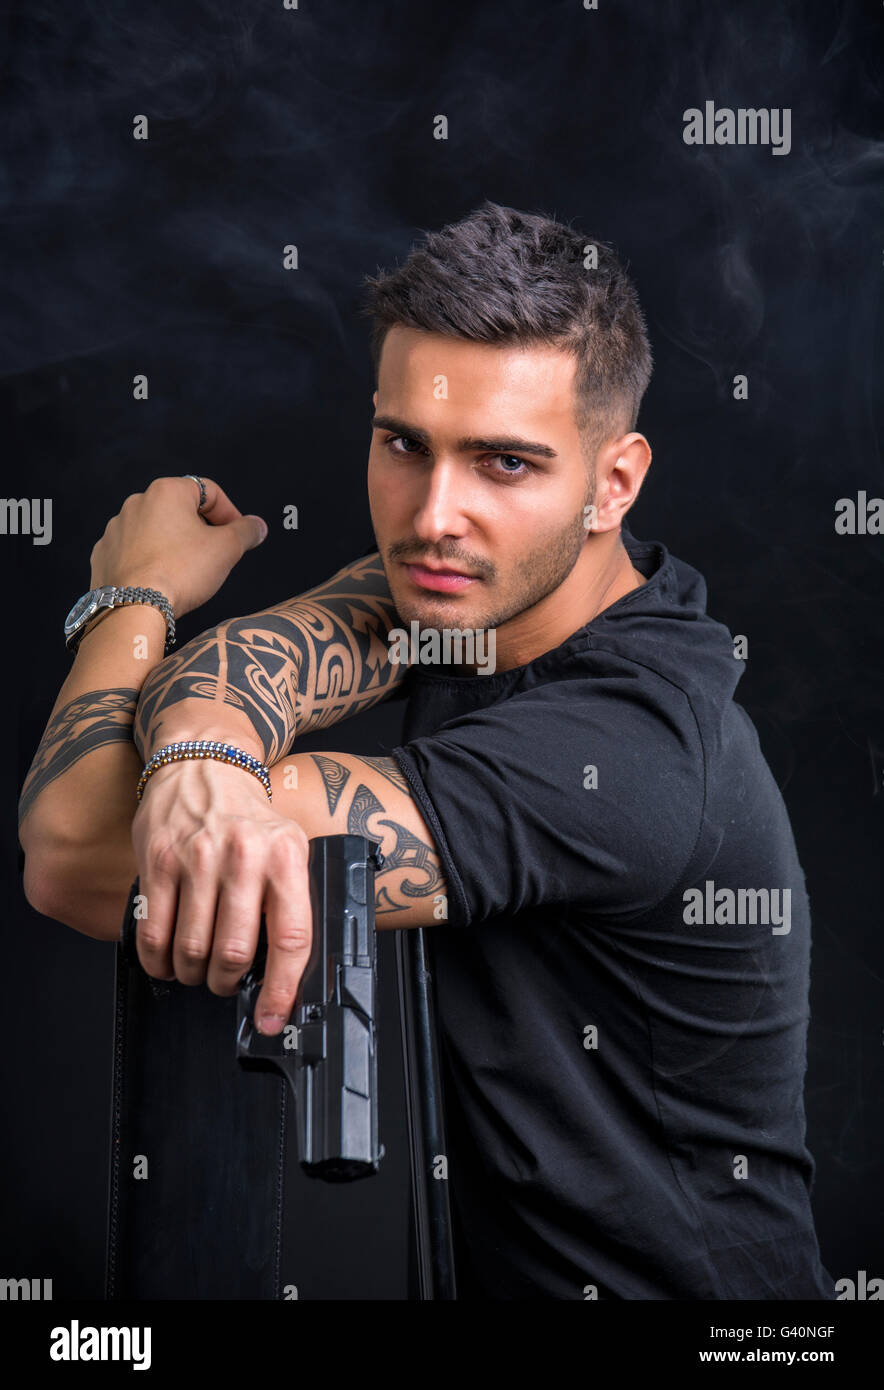 Young handsome man holding a hand gun, wearing black t-shirt, on dark background in studio Stock Photo